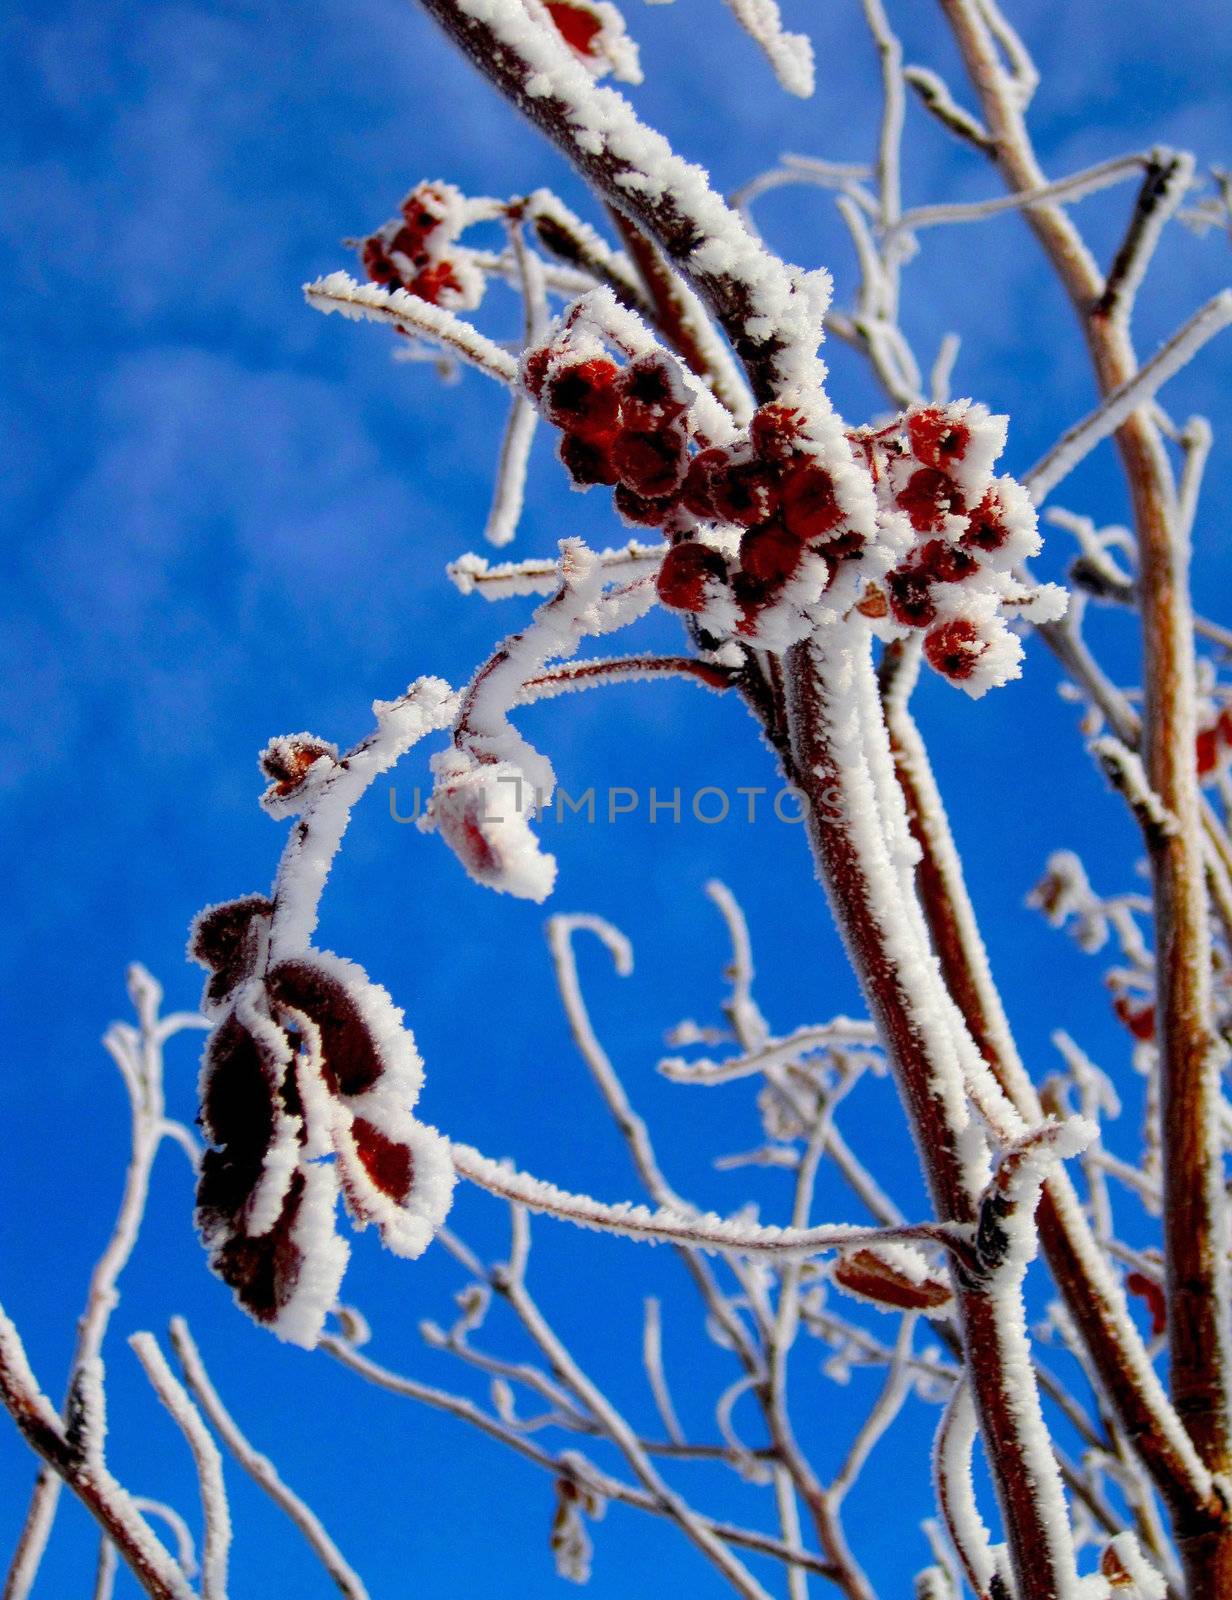 Red berries and leaves covered in hoar frost under a blue sky.